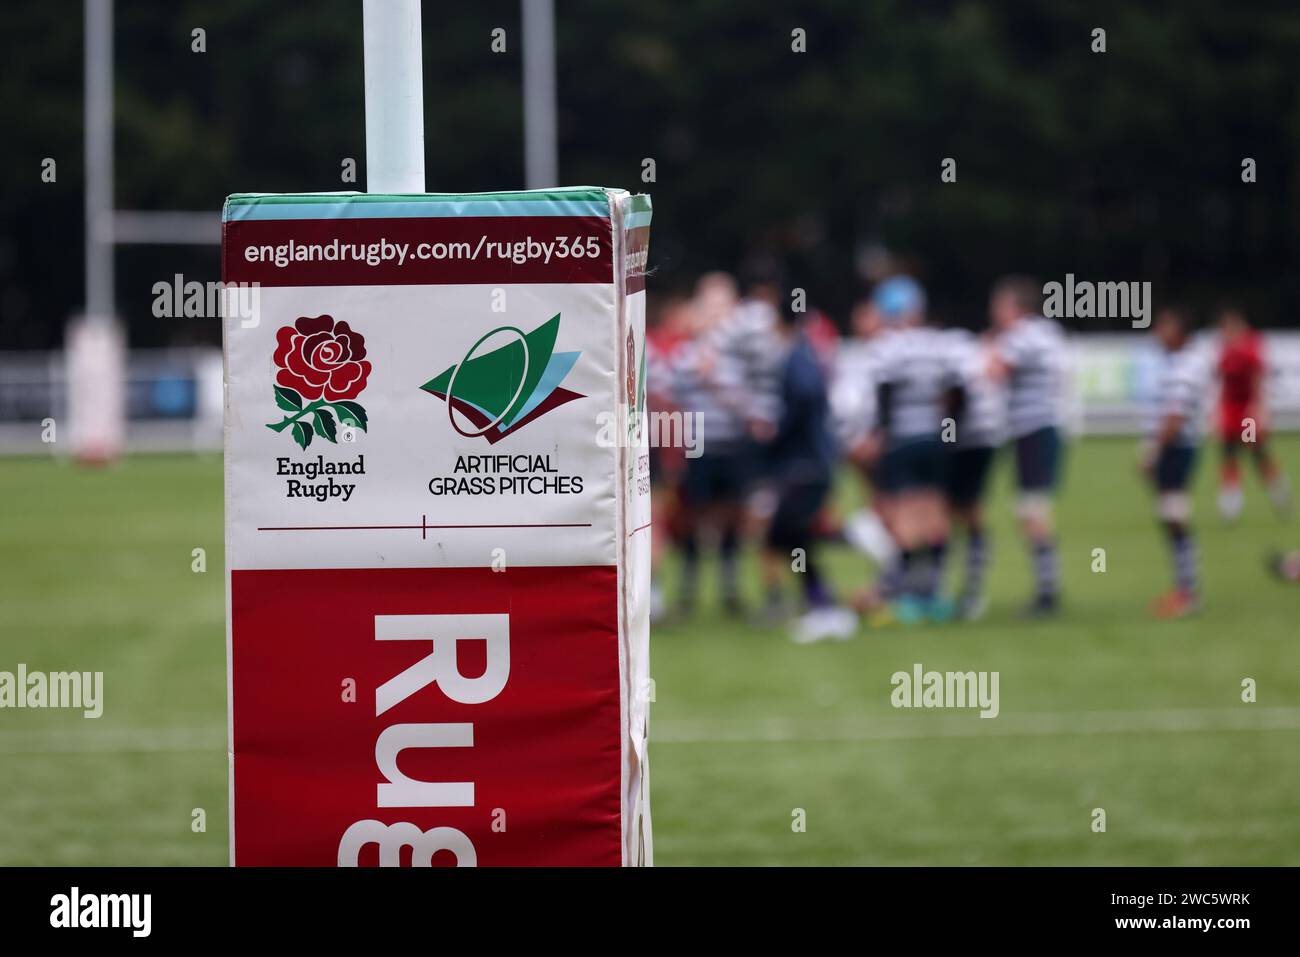 England Rugby and Artificial Pitches logos on flags and Goal Protectors at Havant Rugby Club in Hampshire, UK. Stock Photo